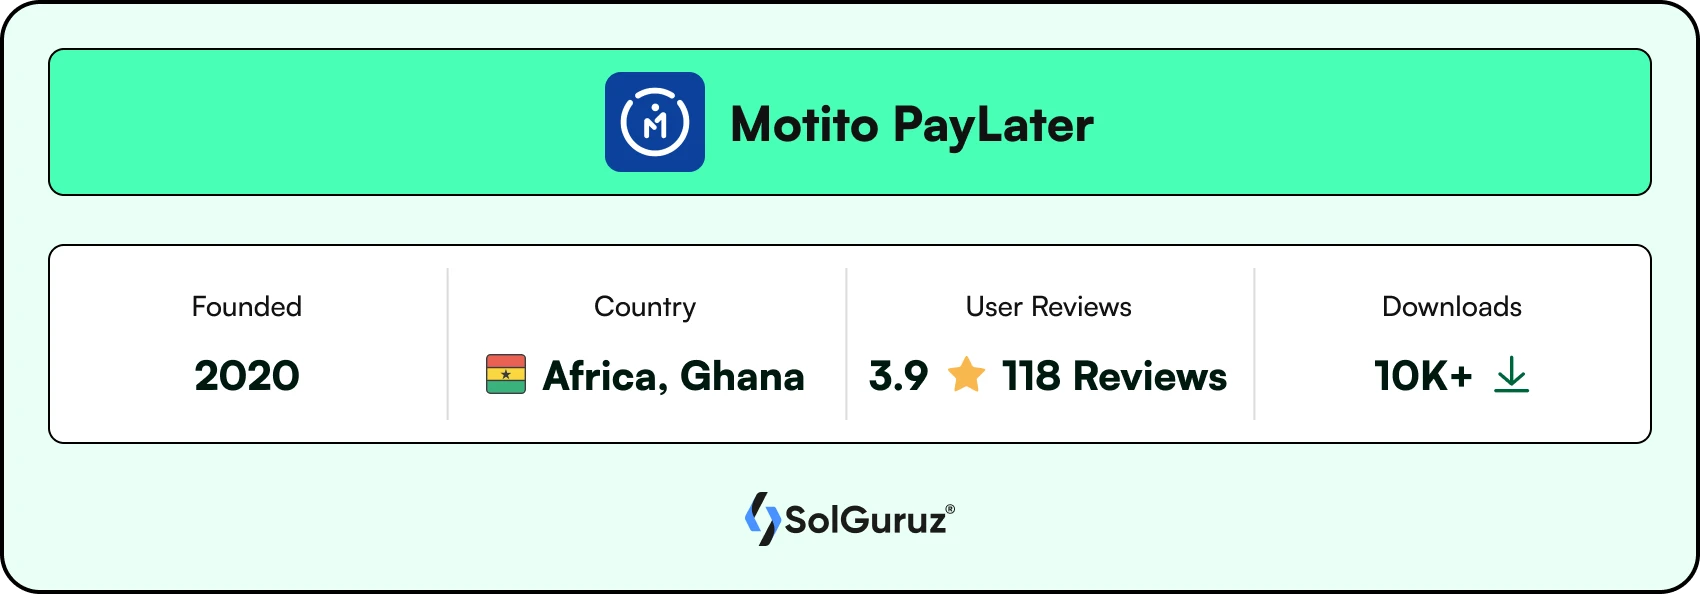 Motito PayLater App in Ghana